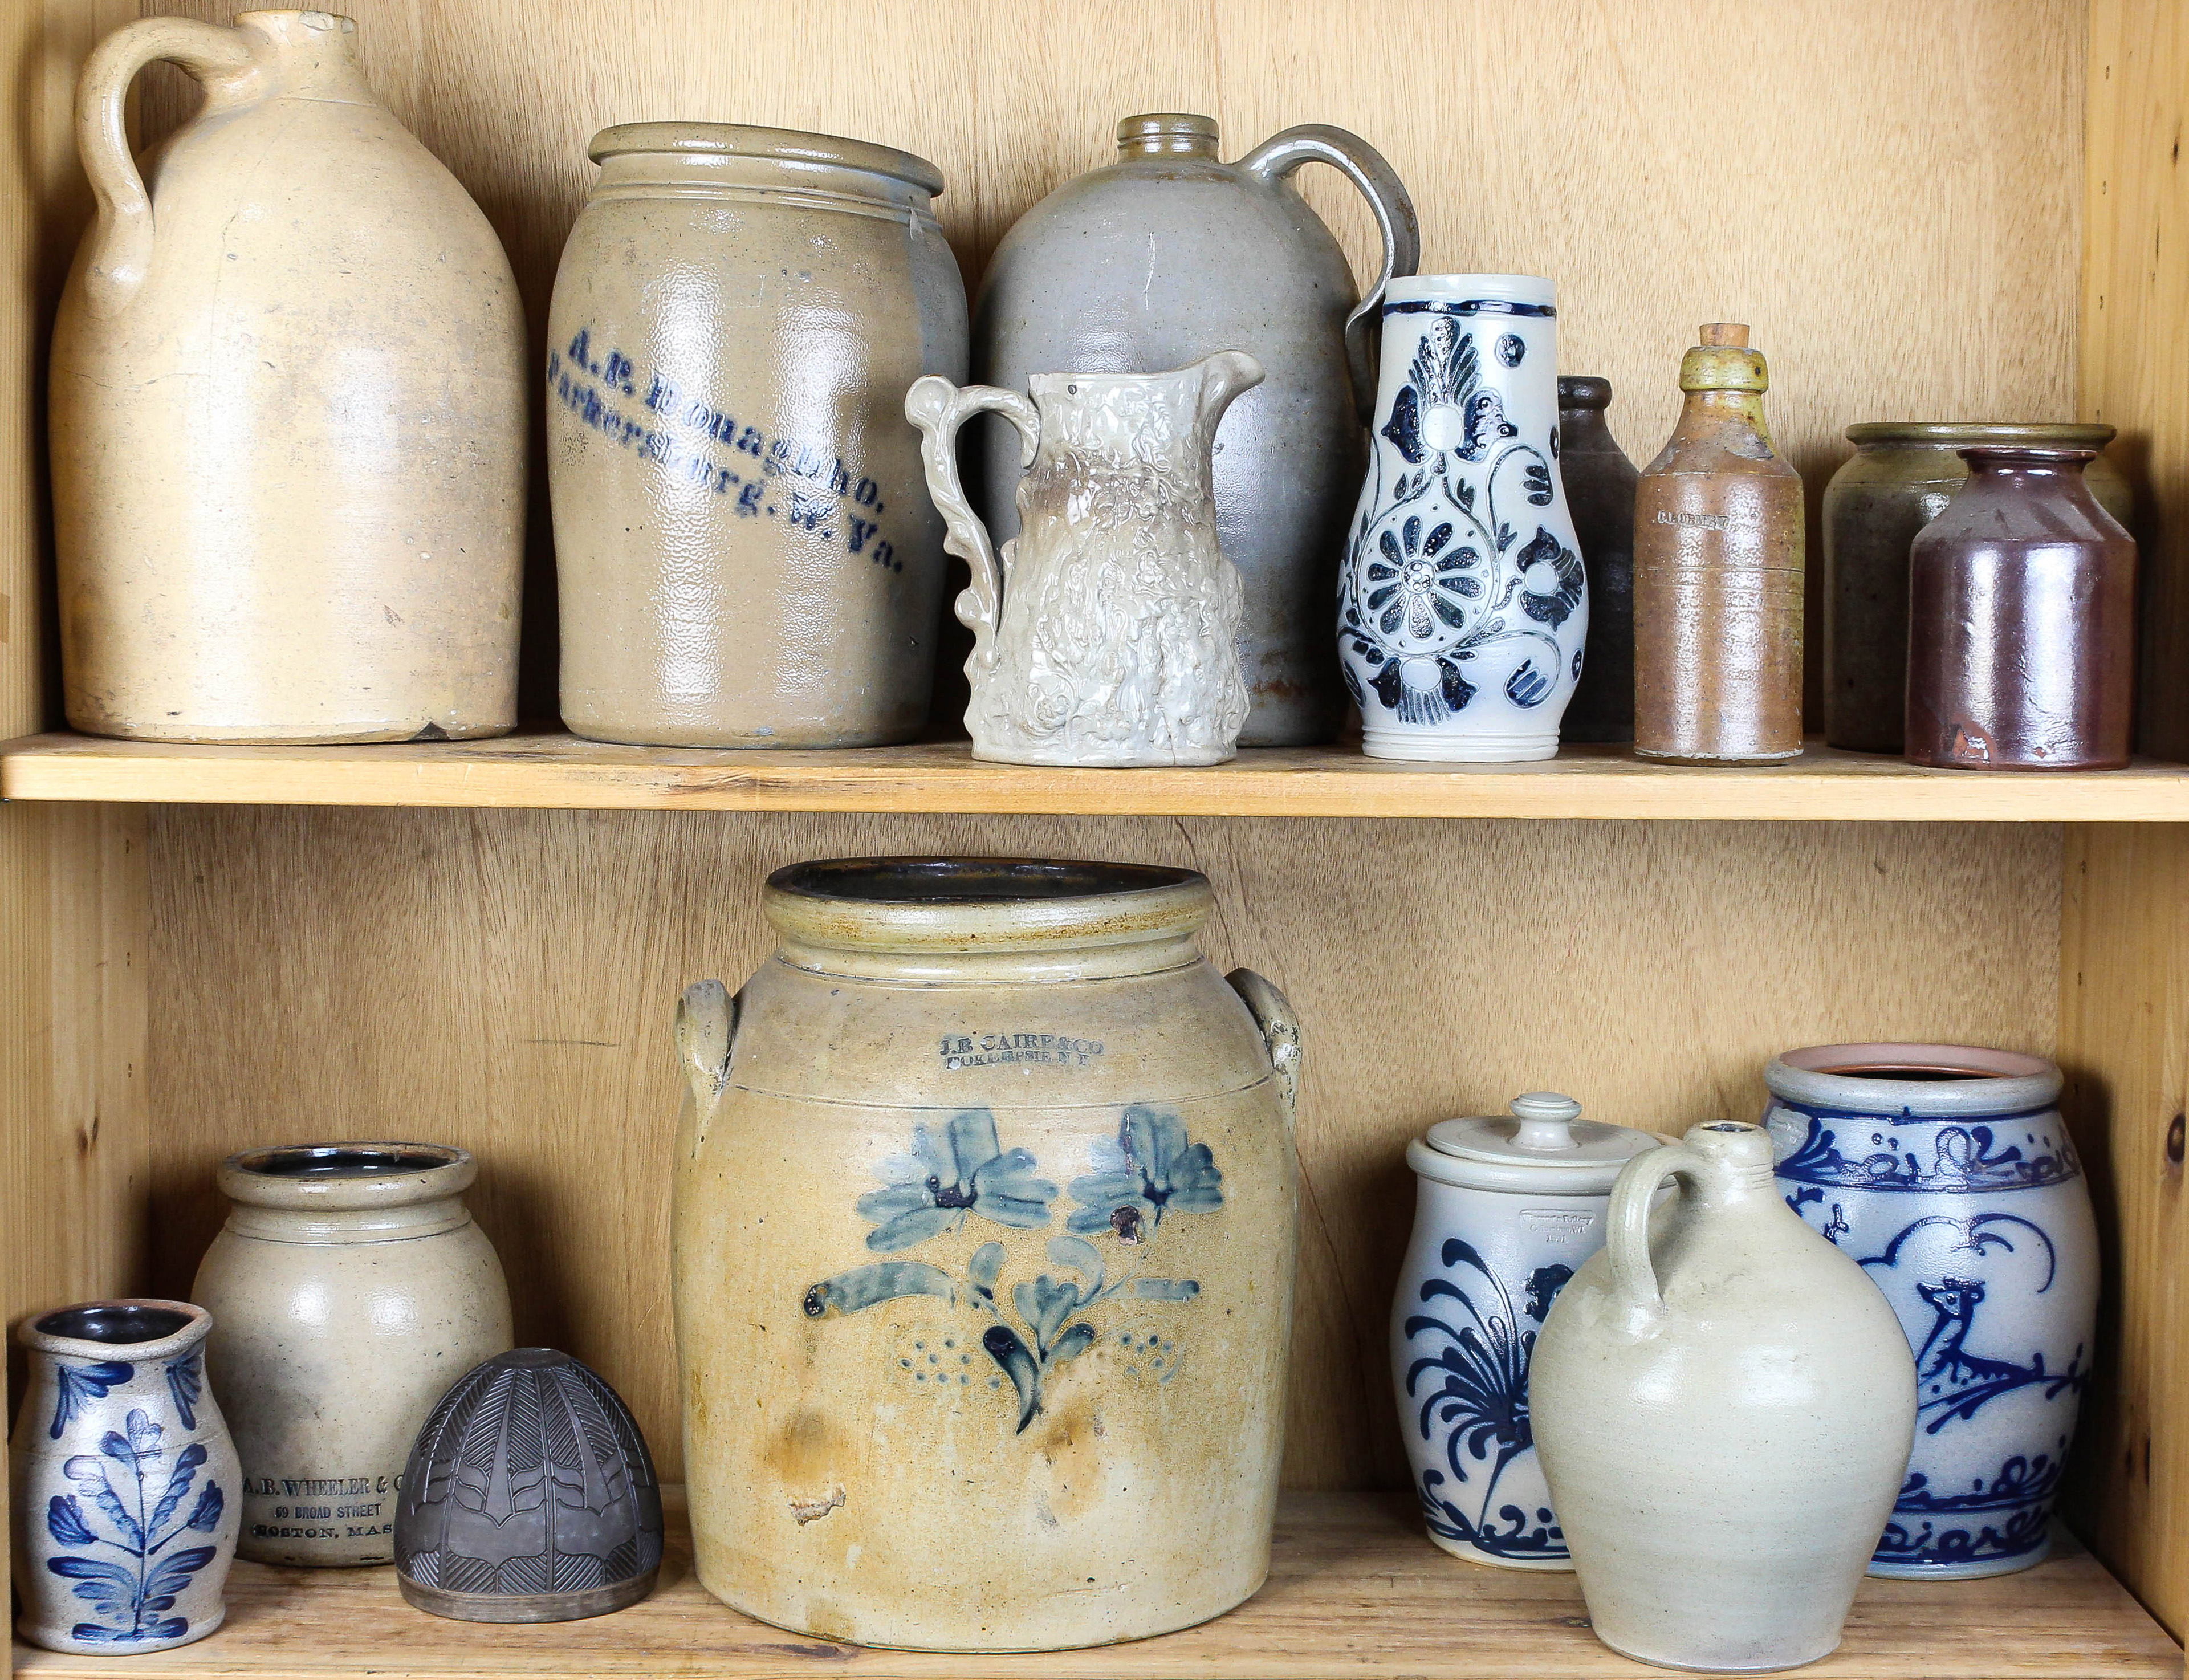 TWO SHELVES OF STONEWARE JARS AND